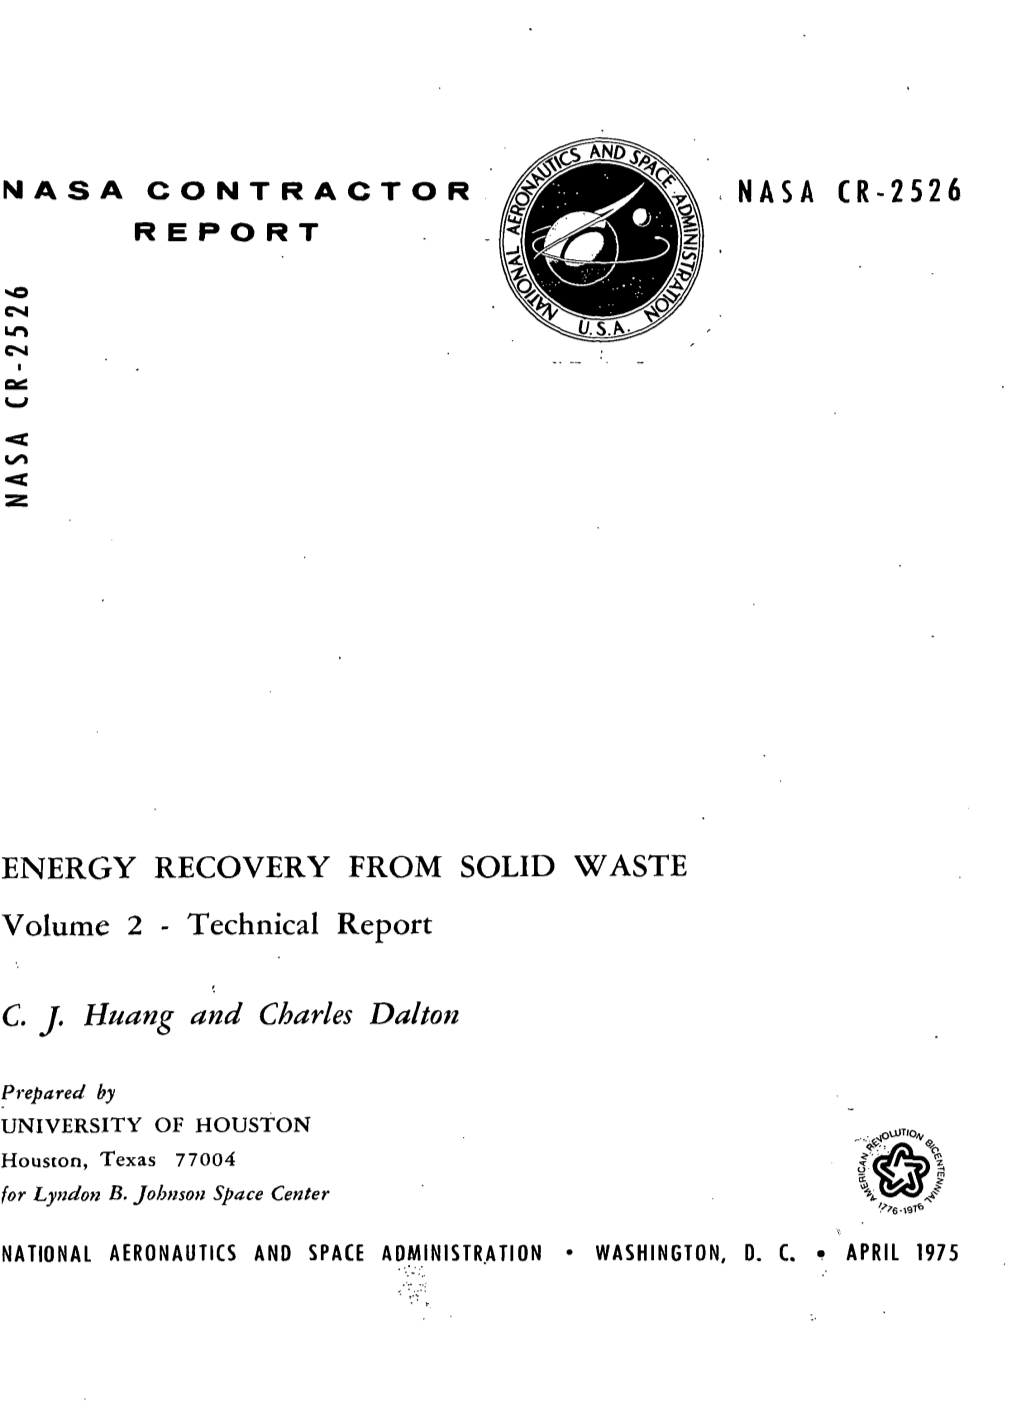 Nasa Cr-2526 Energy Recovery from Solid Waste